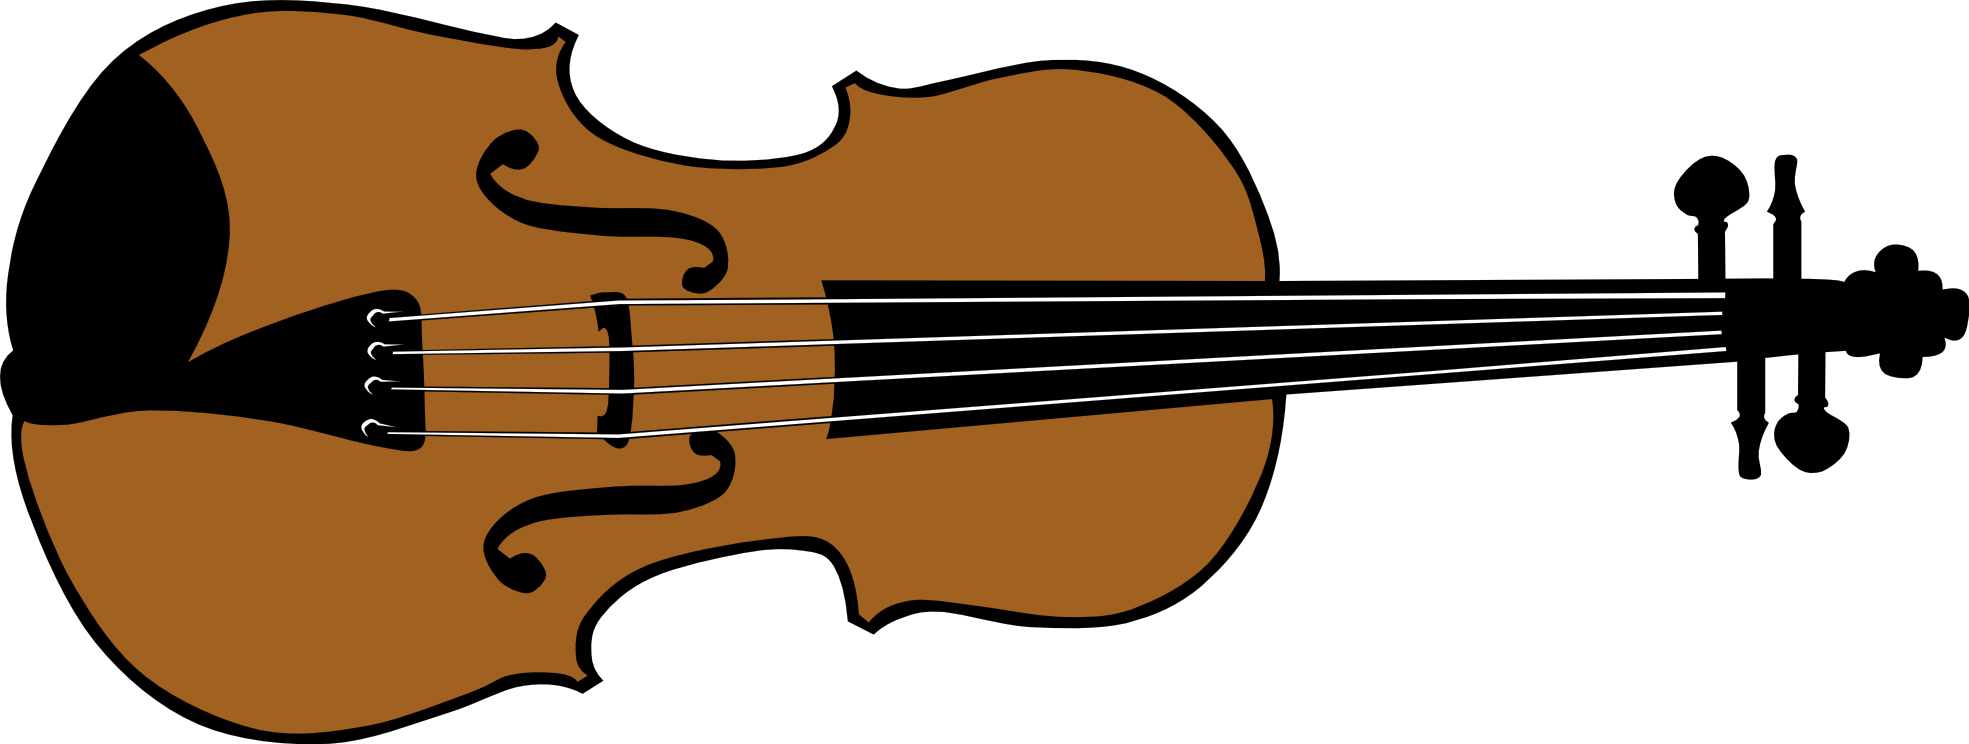 Violin black and white. Clipart guitar easy